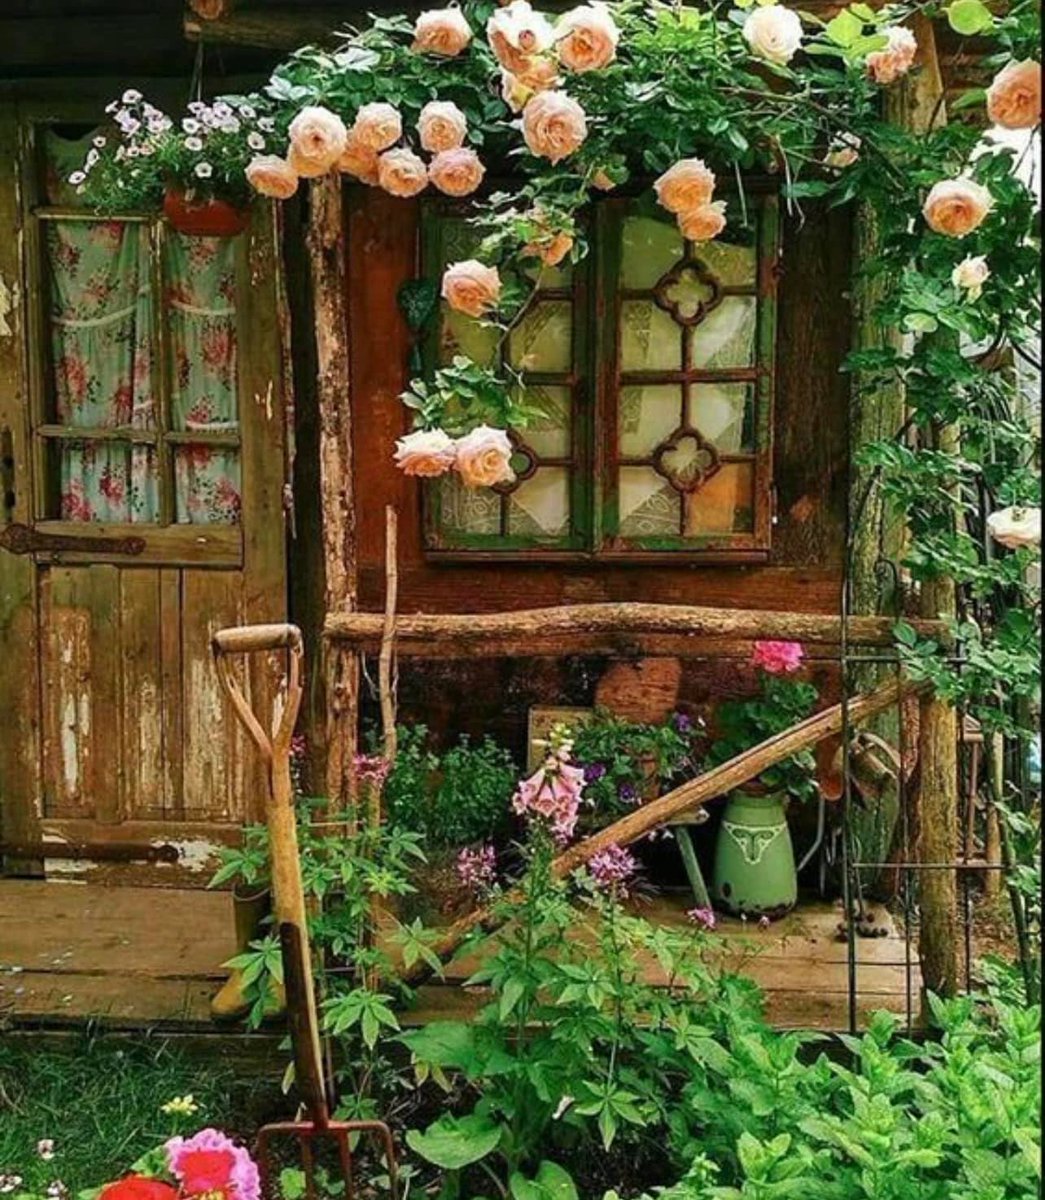 Old garden house and peach roses

#gardenstyle #flowers #gardening